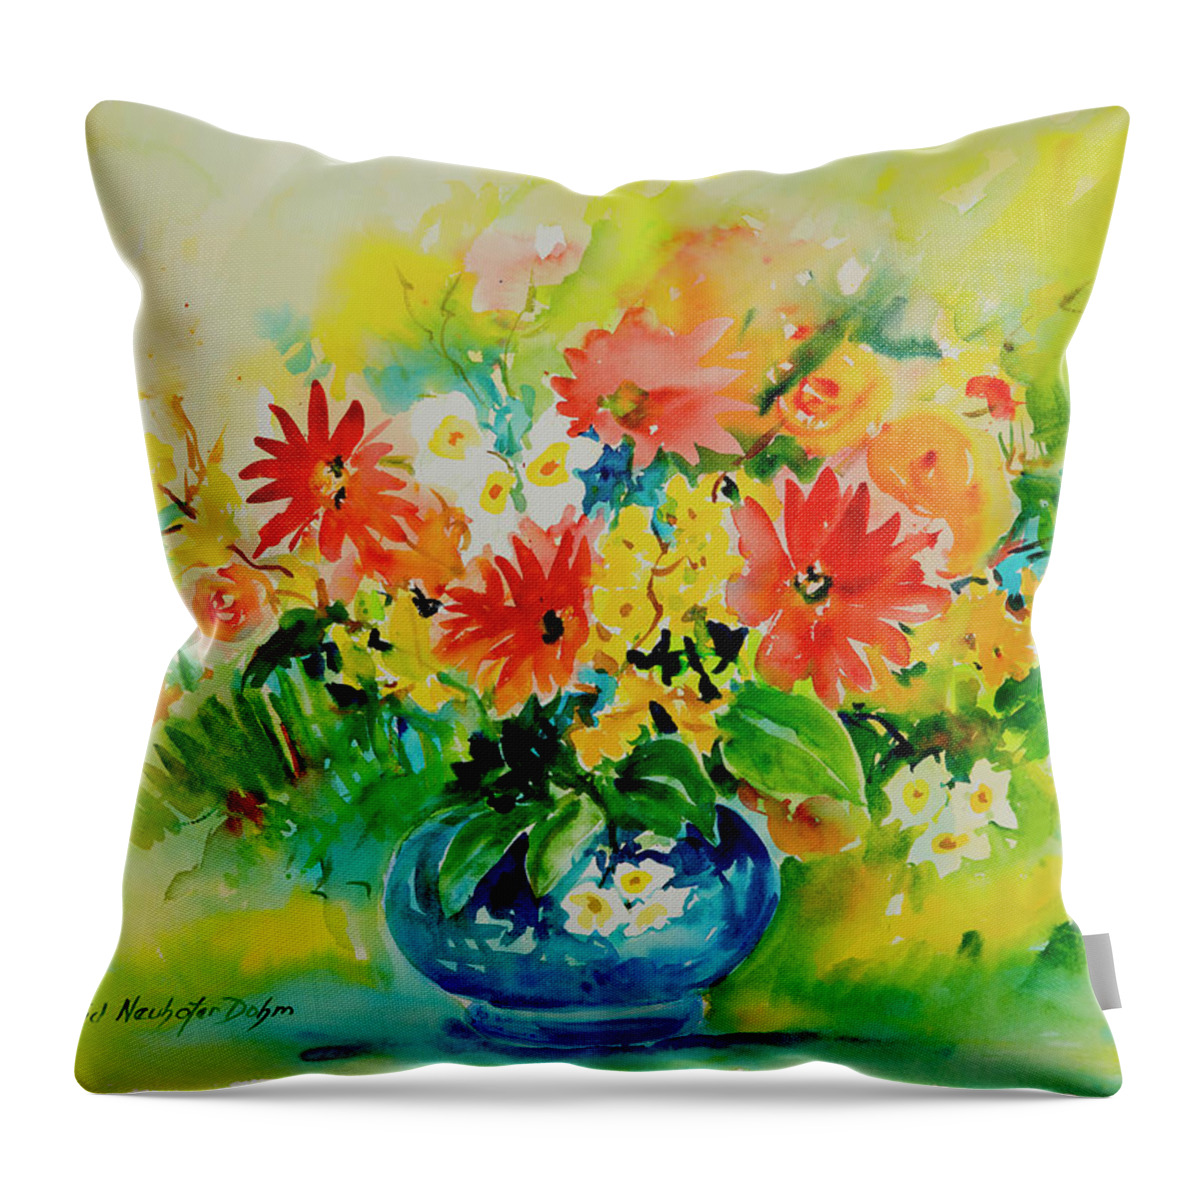 Flowers Throw Pillow featuring the painting Watercolor Series 186 by Ingrid Dohm